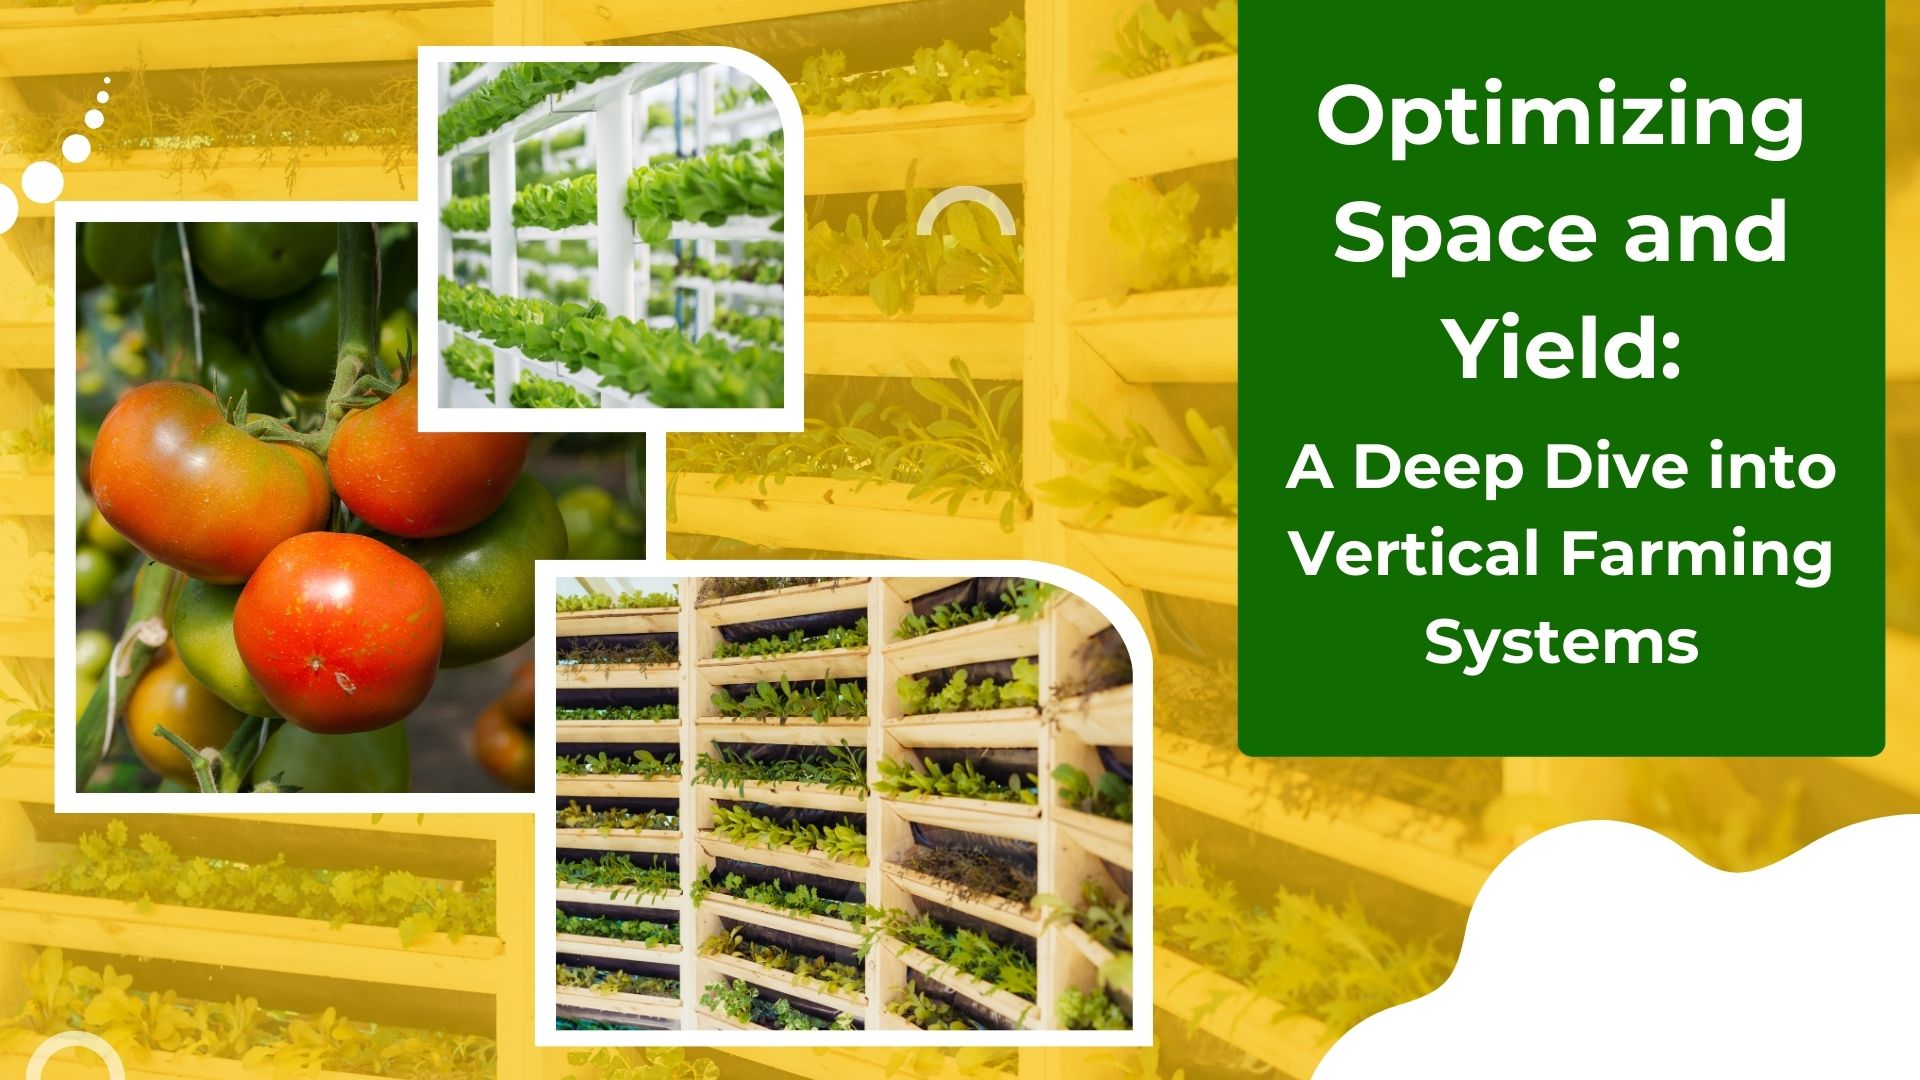 Optimizing Space and Yield: A Deep Dive into Vertical Farming Systems